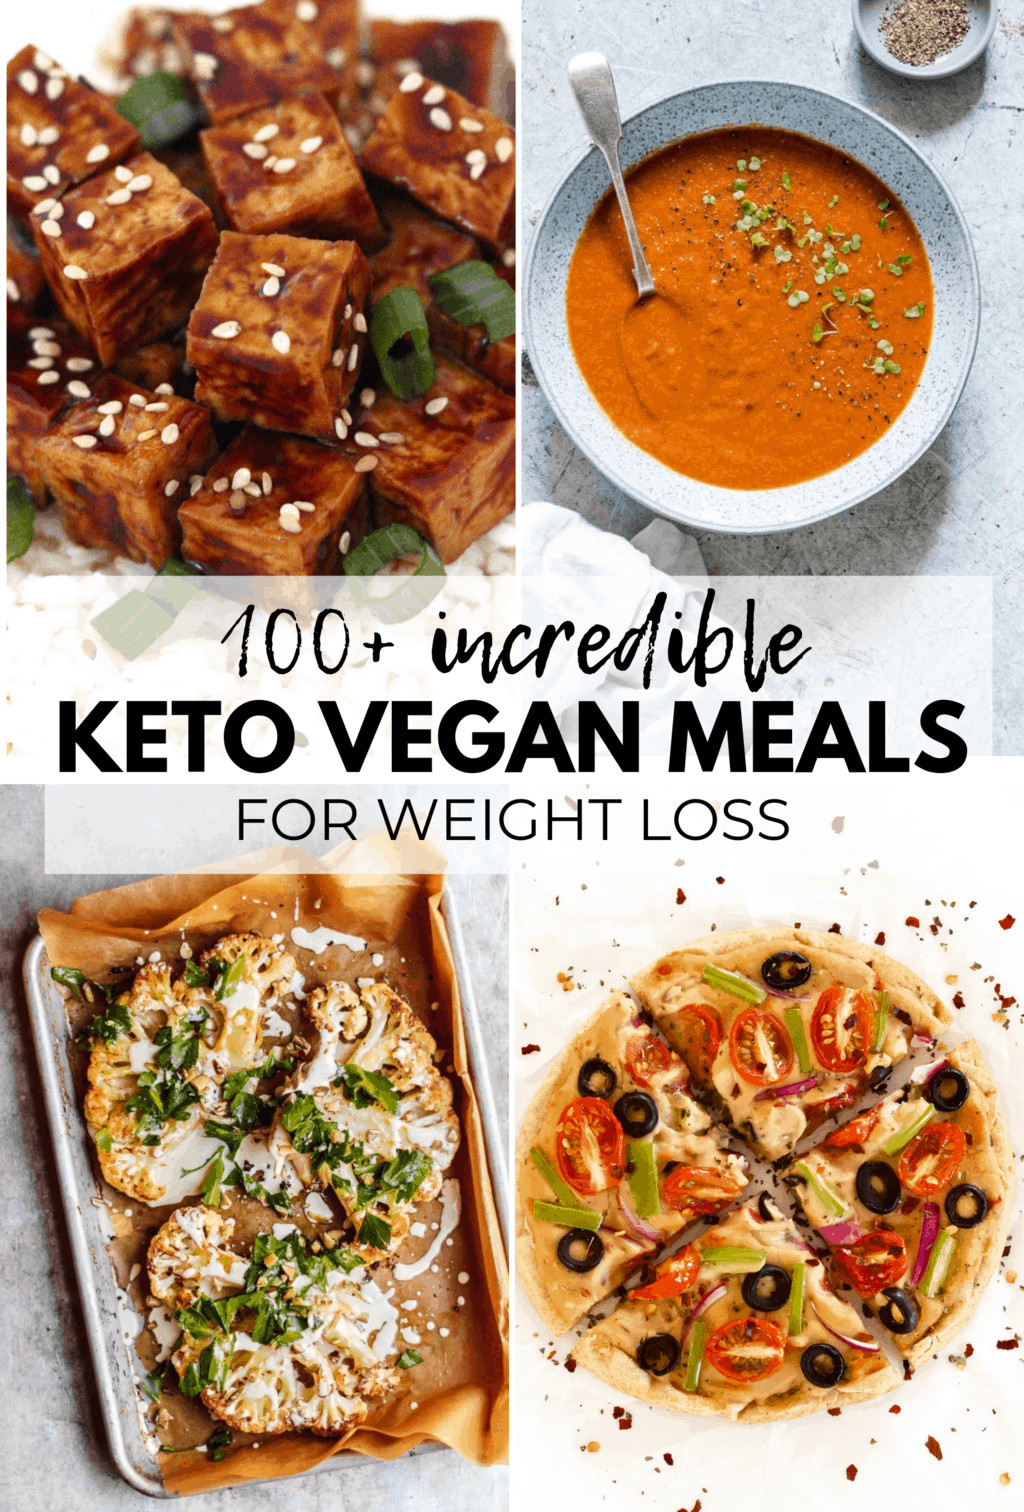 Vegan Keto Diet For Weight Loss 100 AMAZING Keto Vegan Recipes For Weight Loss